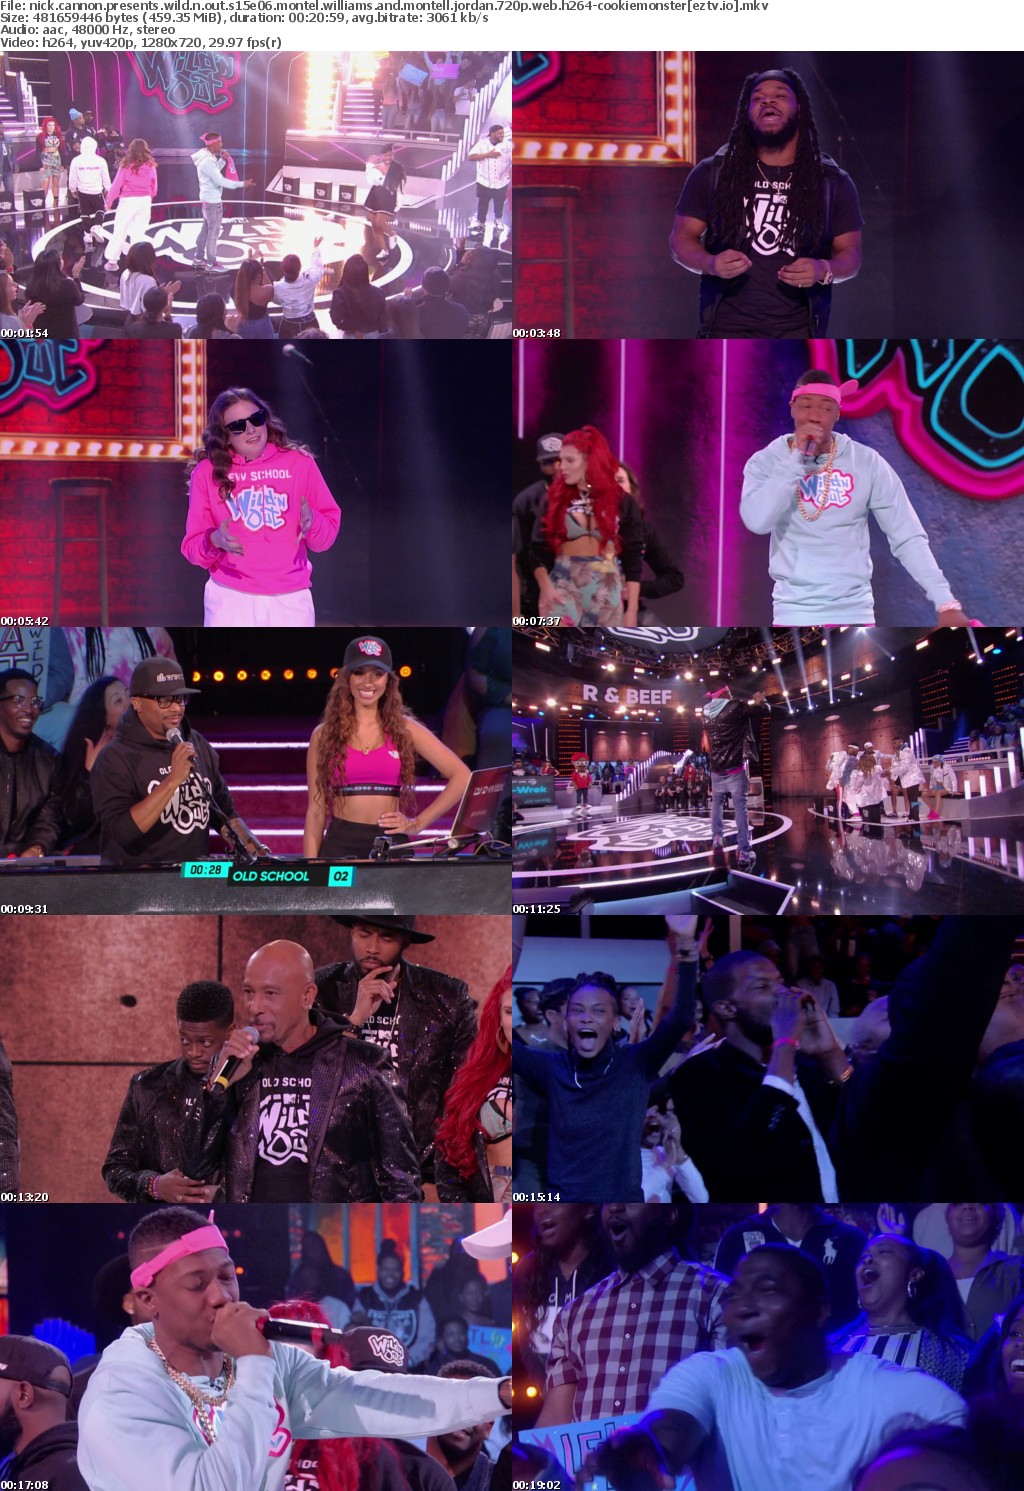 Nick Cannon Presents Wild n Out S15E06 Montel Williams and Montell Jordan 720p WEB h264-CookieMonster